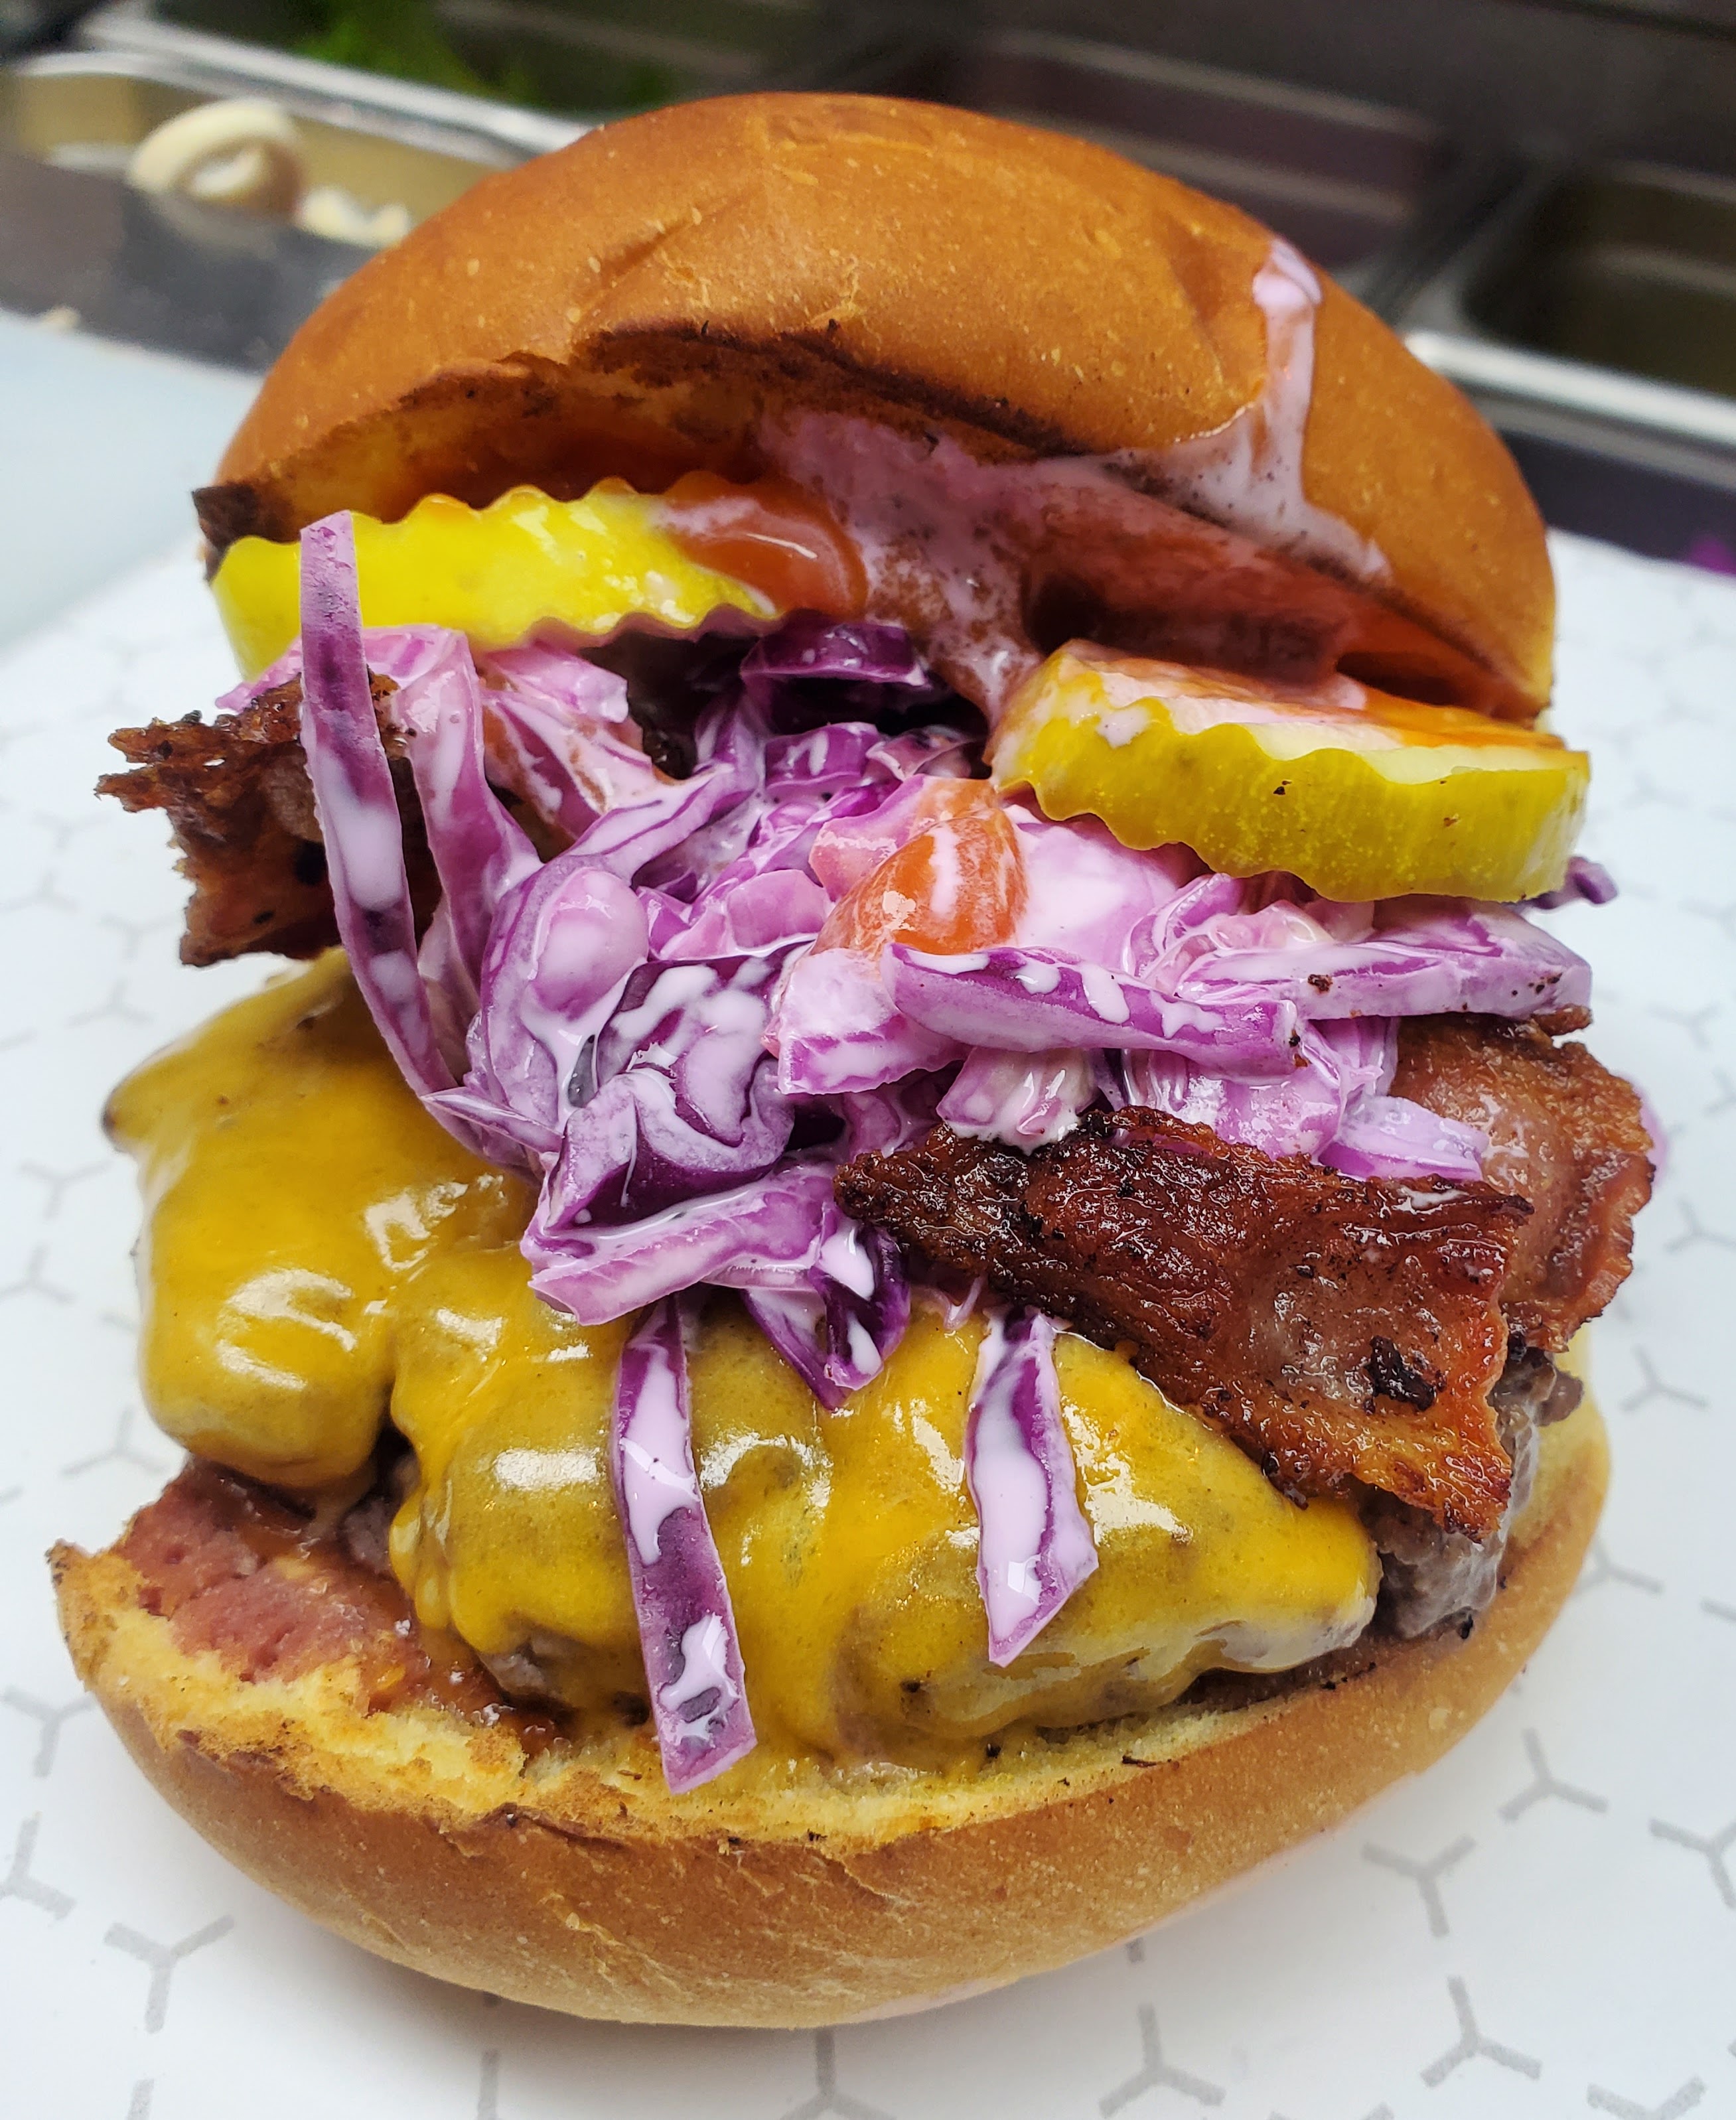 SpOt Burger, with smoked bacon, cheddar, pickles, coleslaw, and SpOt sauce